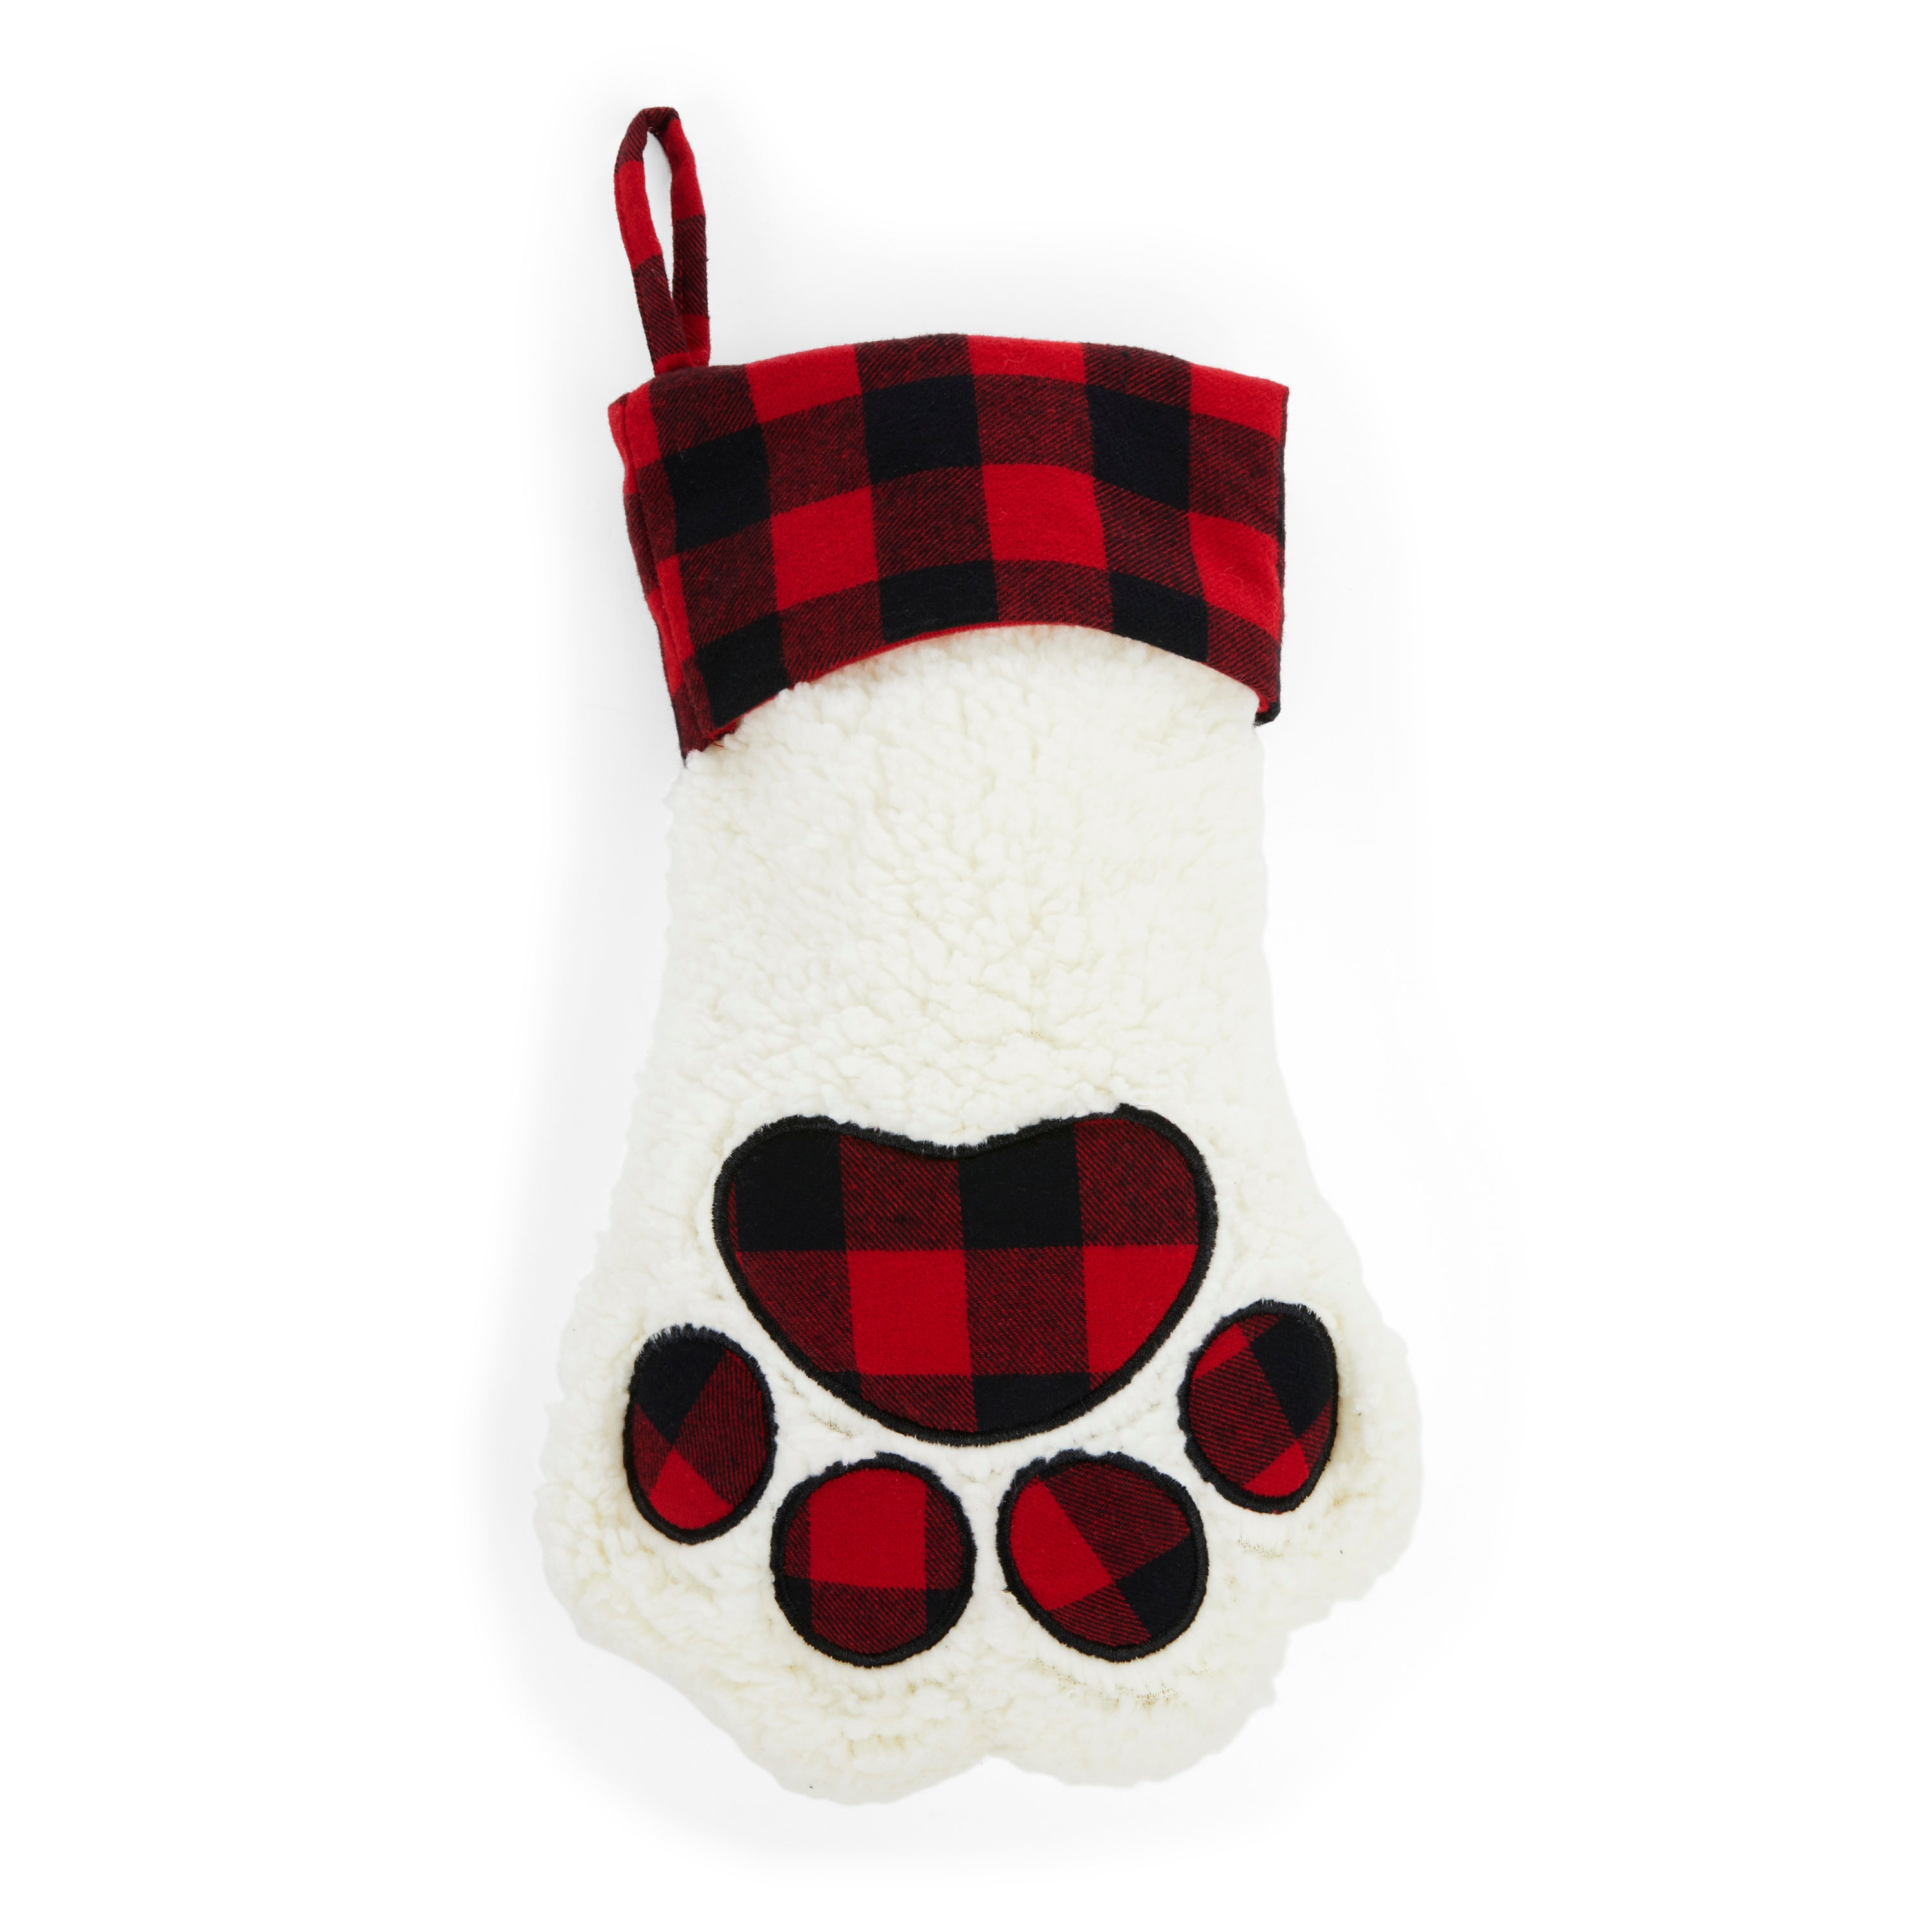 More & Merrier White Paw Stocking with Cozy Fabrication and Cheery Buffalo Check Print